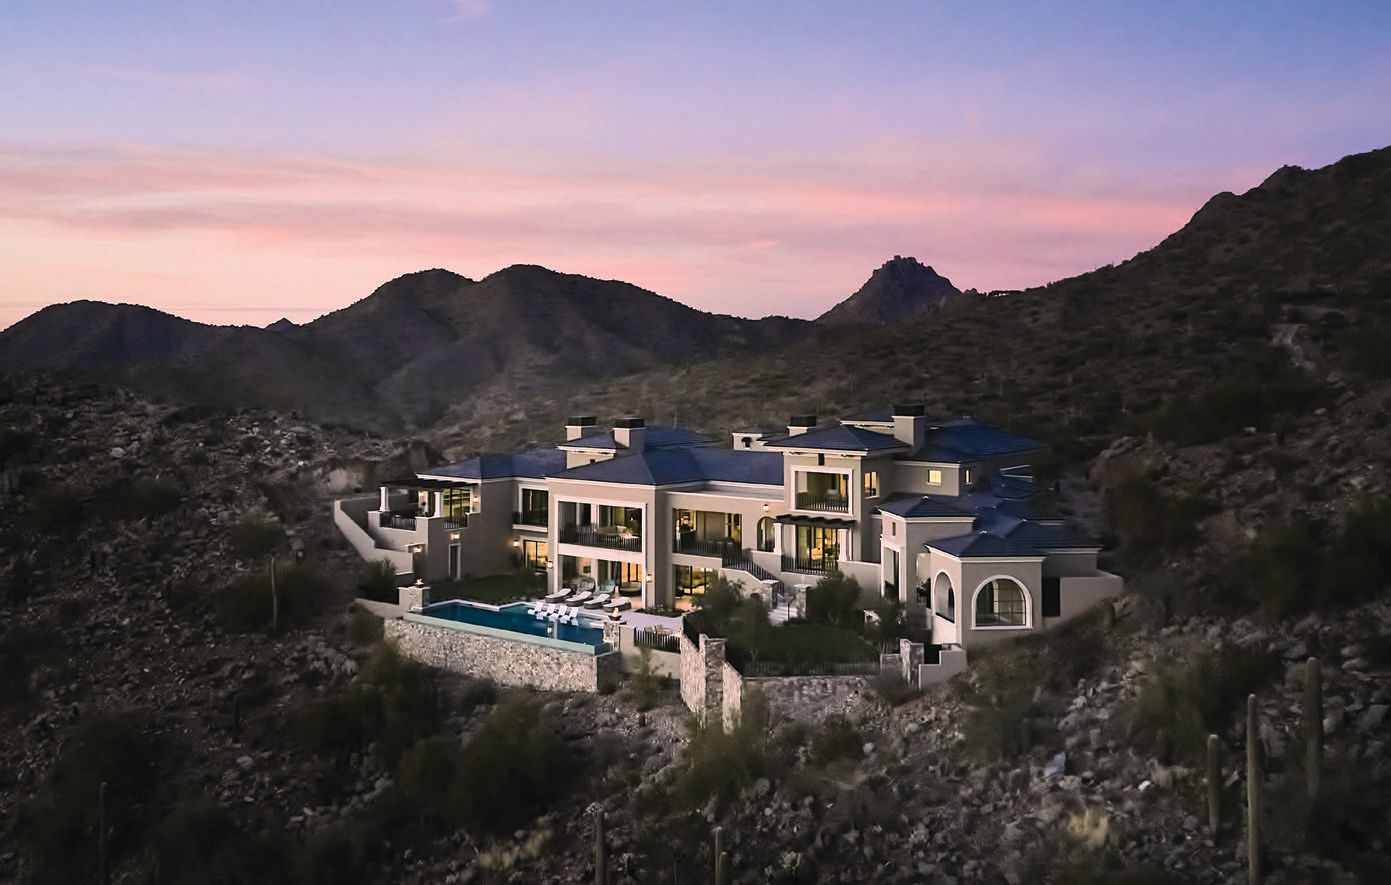 Salcito Custom Homes expertly crafted this massive manse in the hills PHOTO: COURTESY OF ANTHONY SALCITO